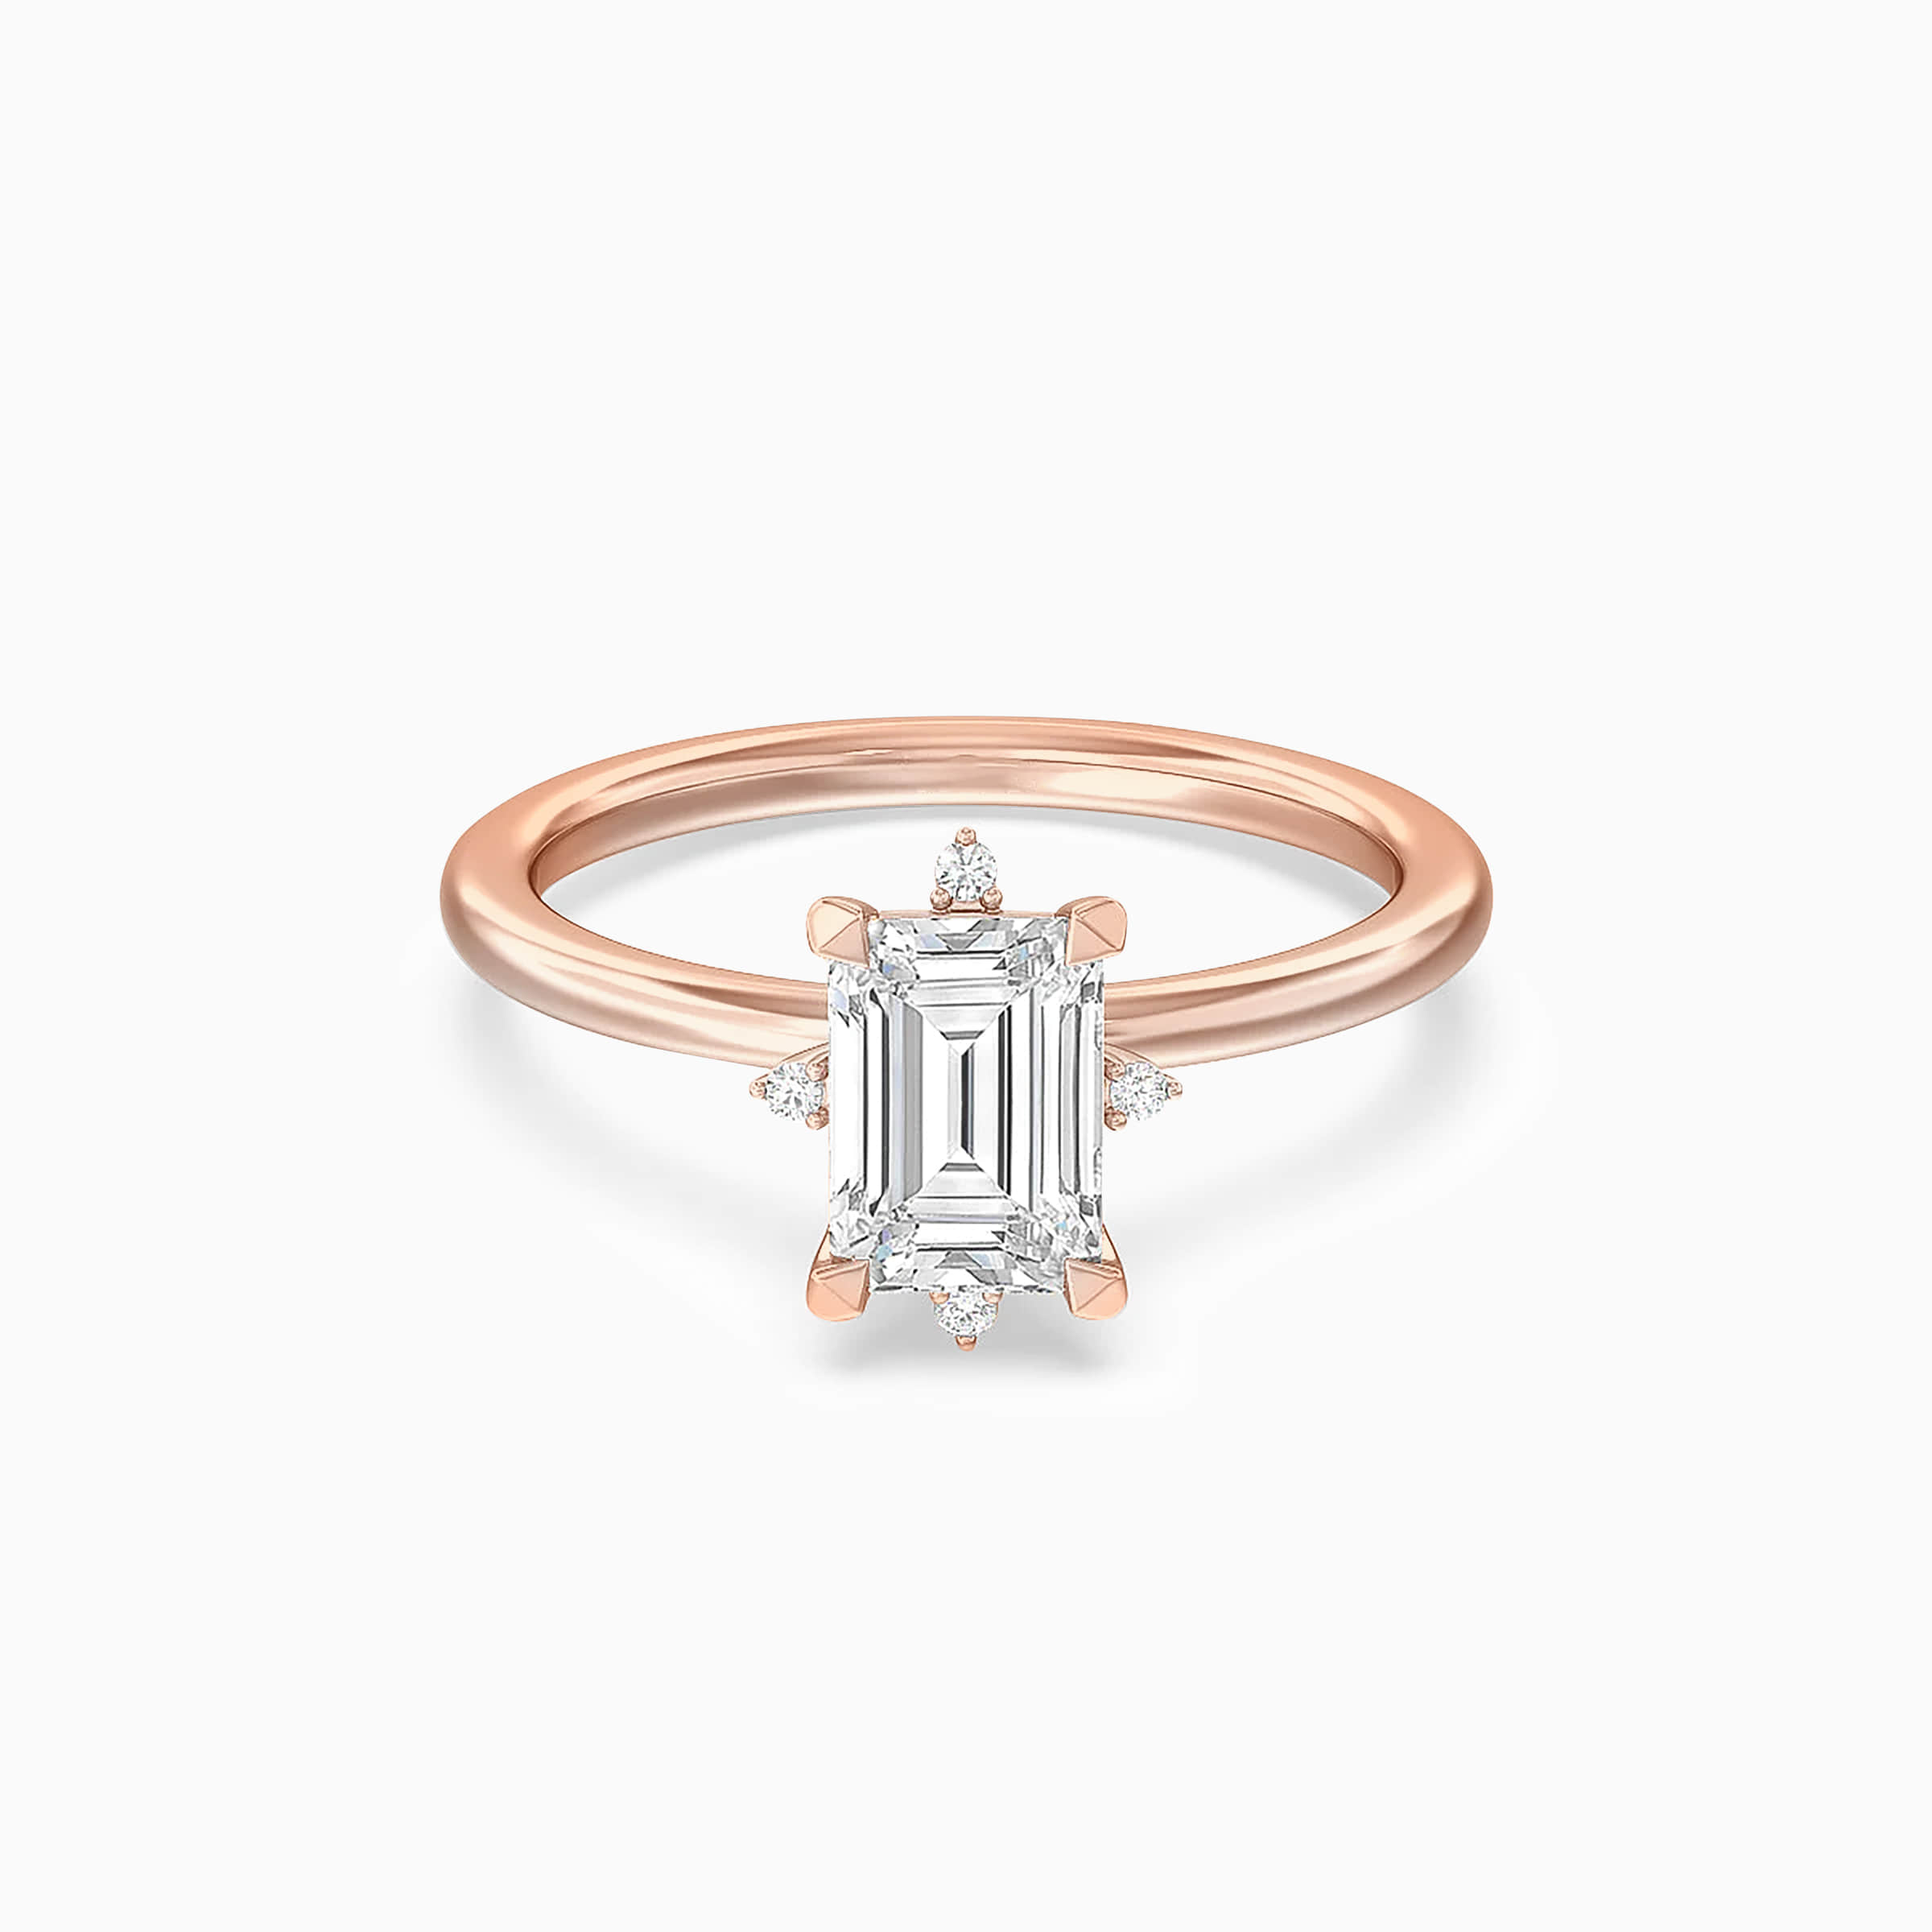 Darry Ring classic emerald cut engagement ring in rose gold